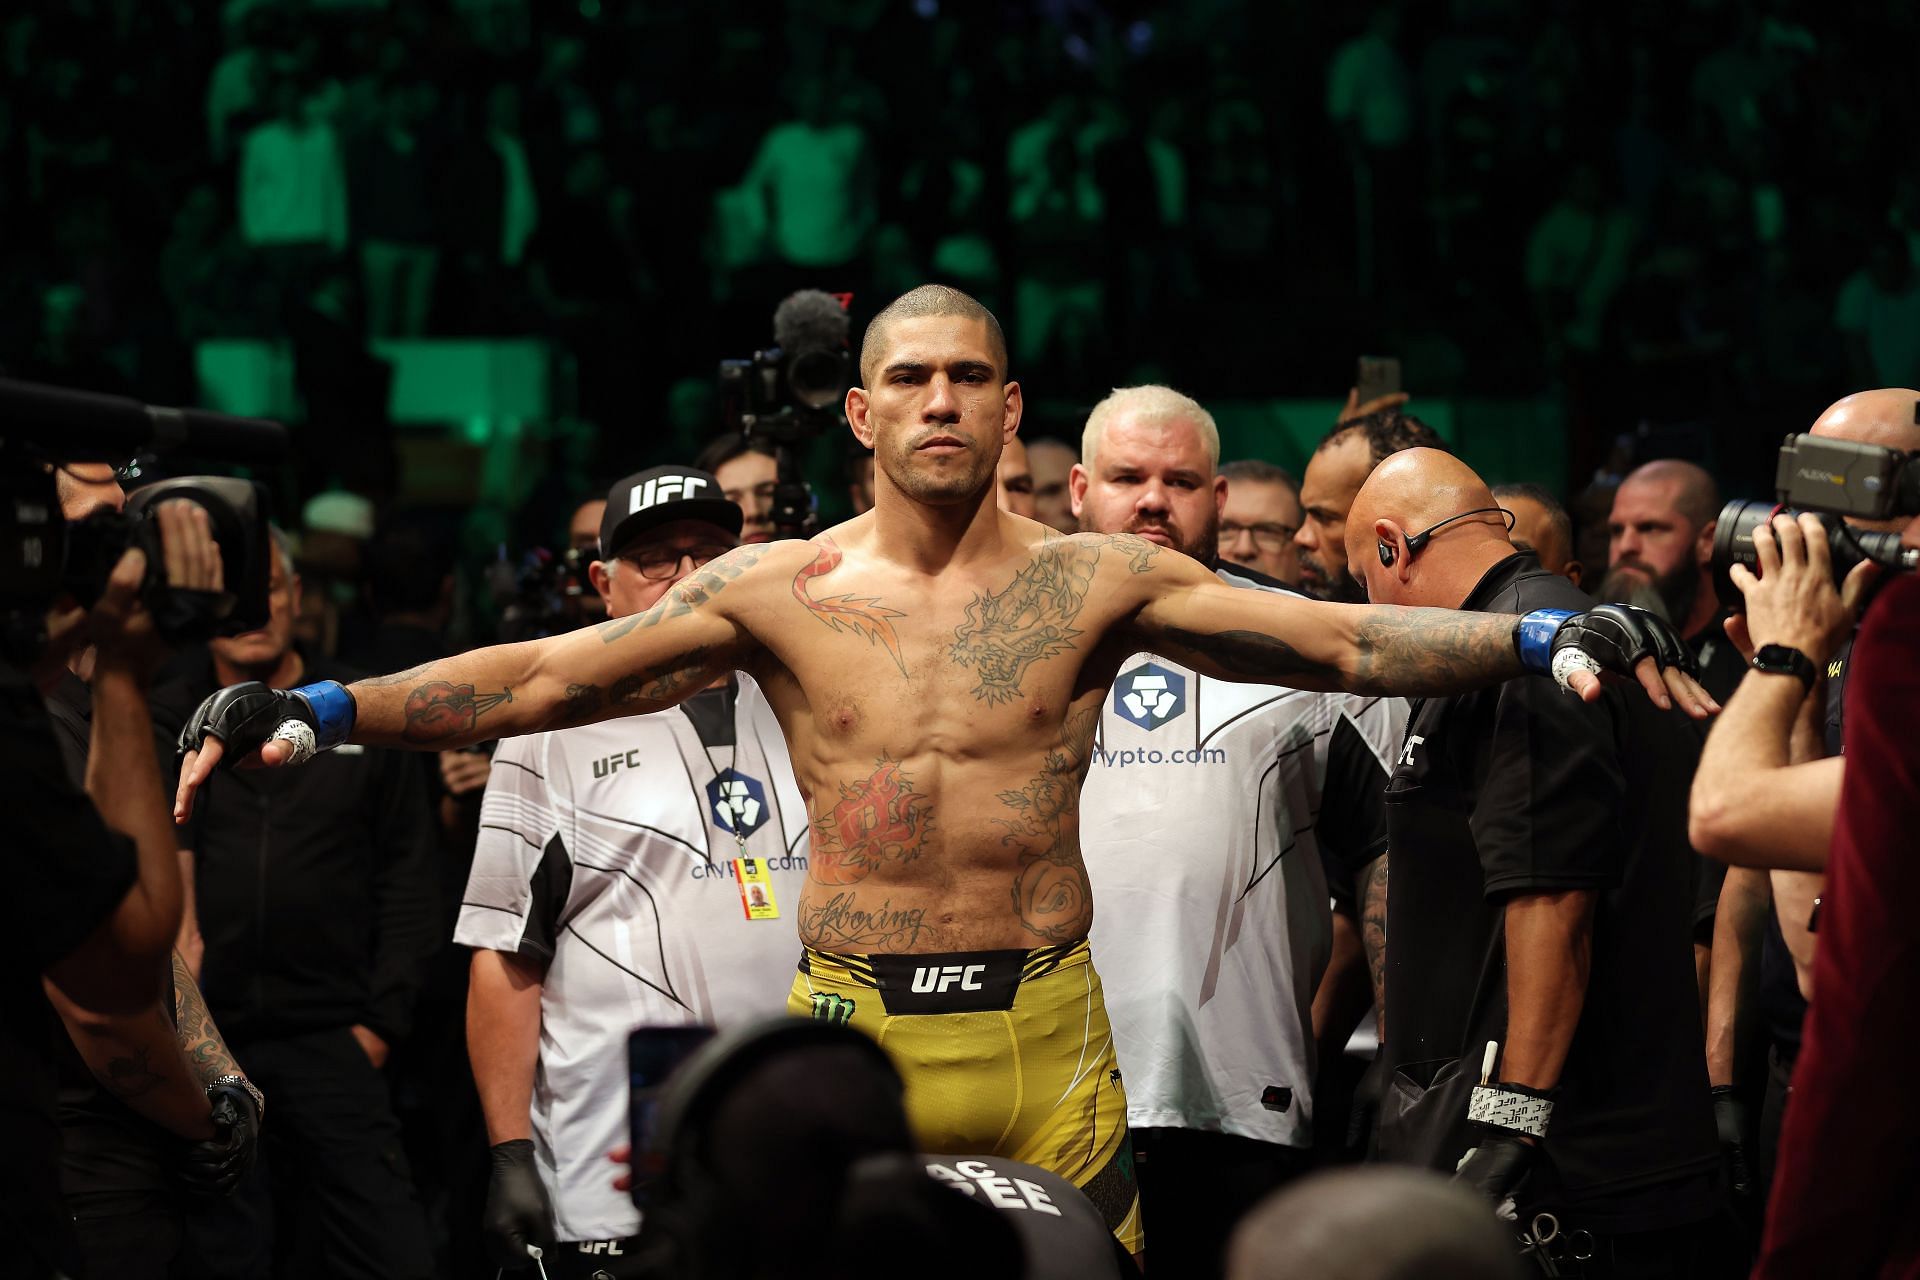 The UFC could visit plenty of new places in Brazil with stars like Alex Pereira